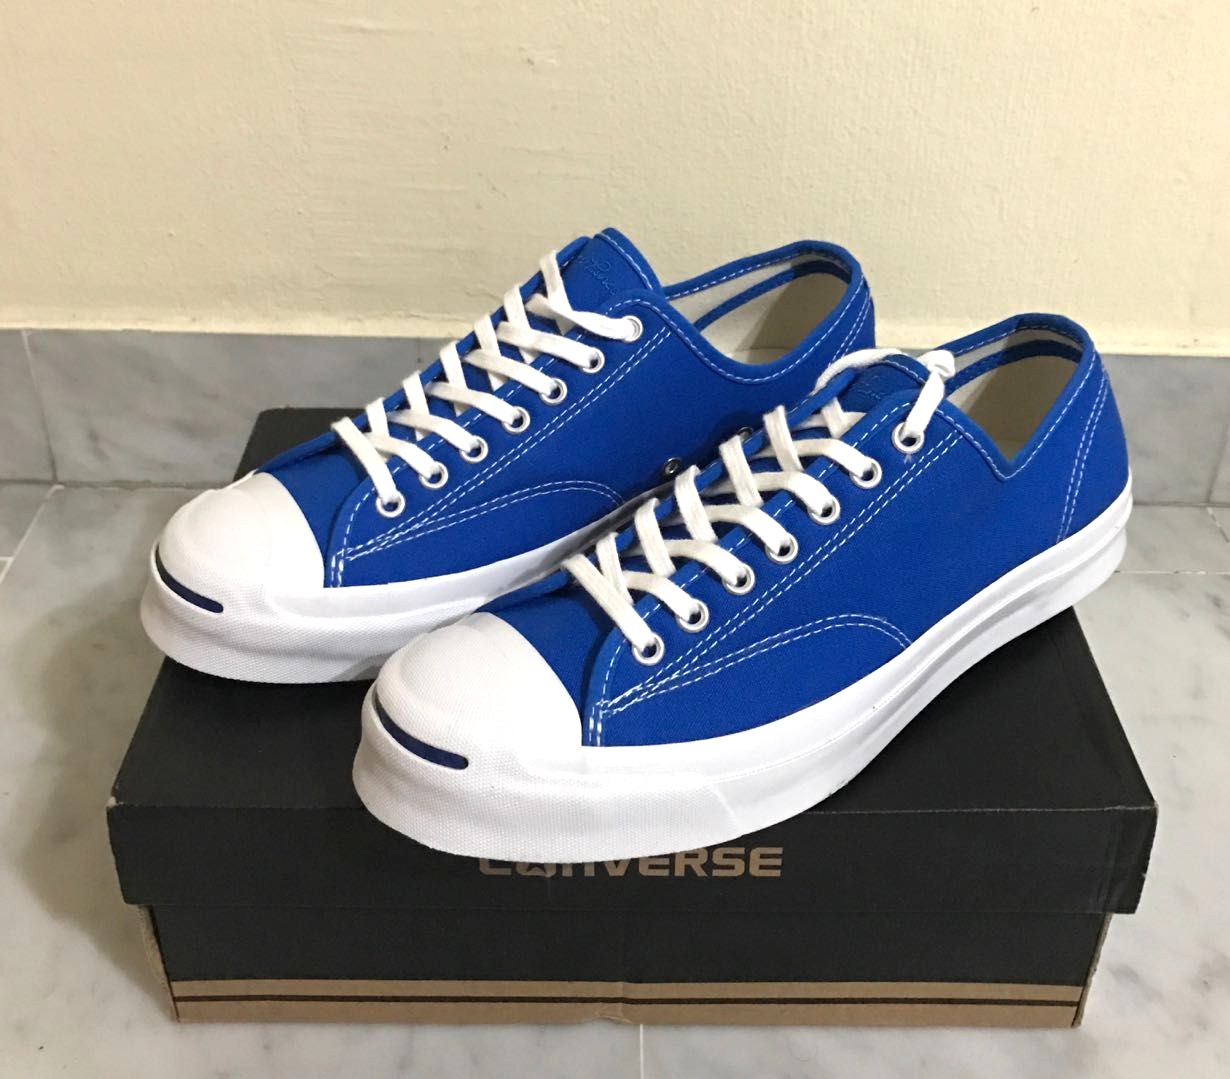 jack purcell blue converse